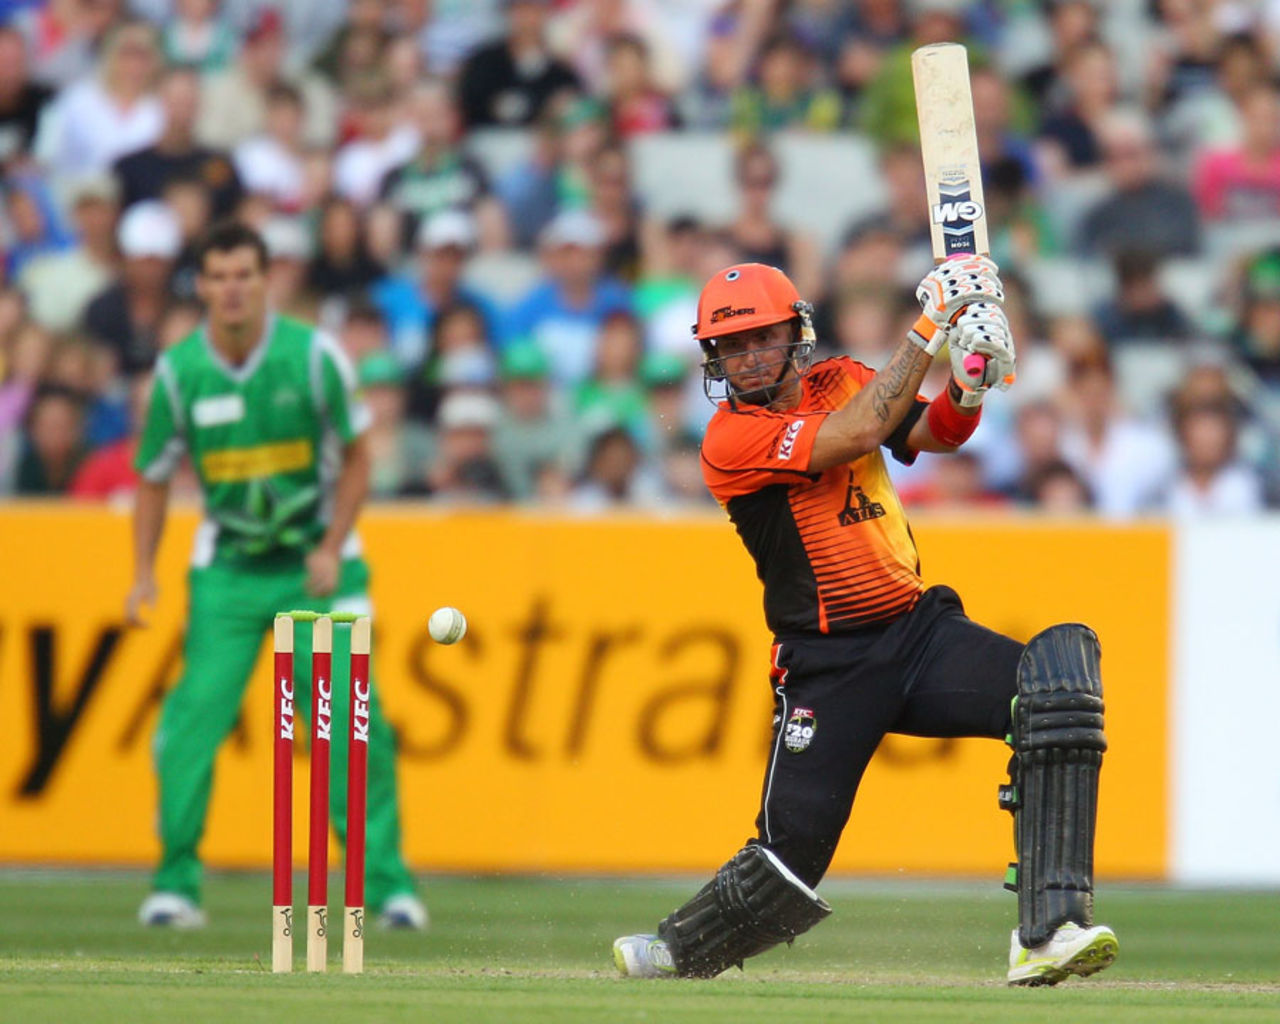 Herschelle Gibbs drives during his innings of 69, Melbourne Stars v Perth Scorchers, BBL 2011-12, MCG, January 4, 2012